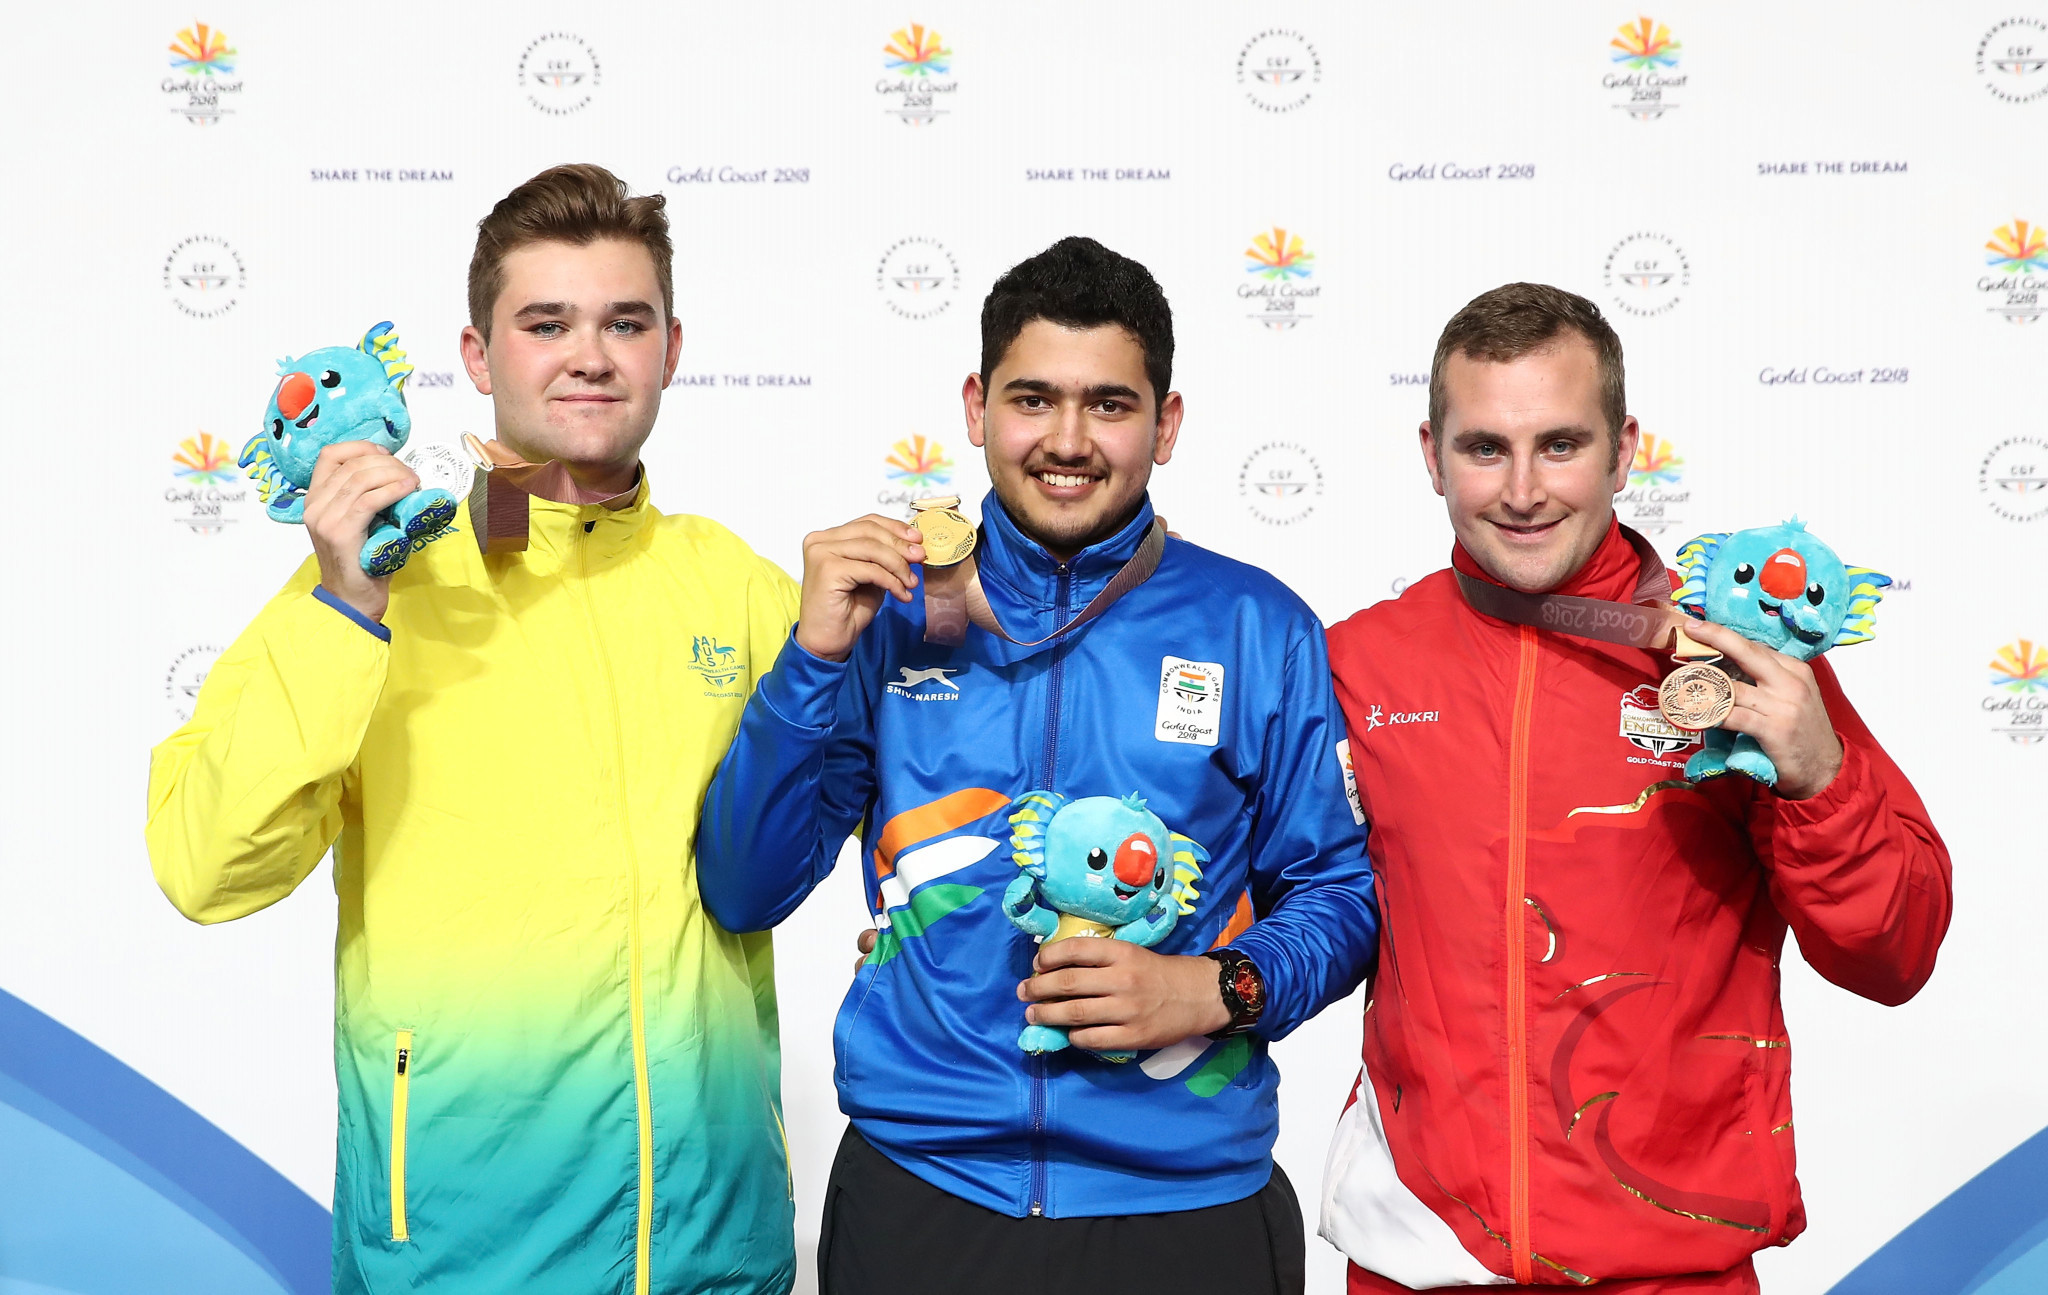 Anish becomes youngest Indian Commonwealth Games champion in history at Gold Coast 2018